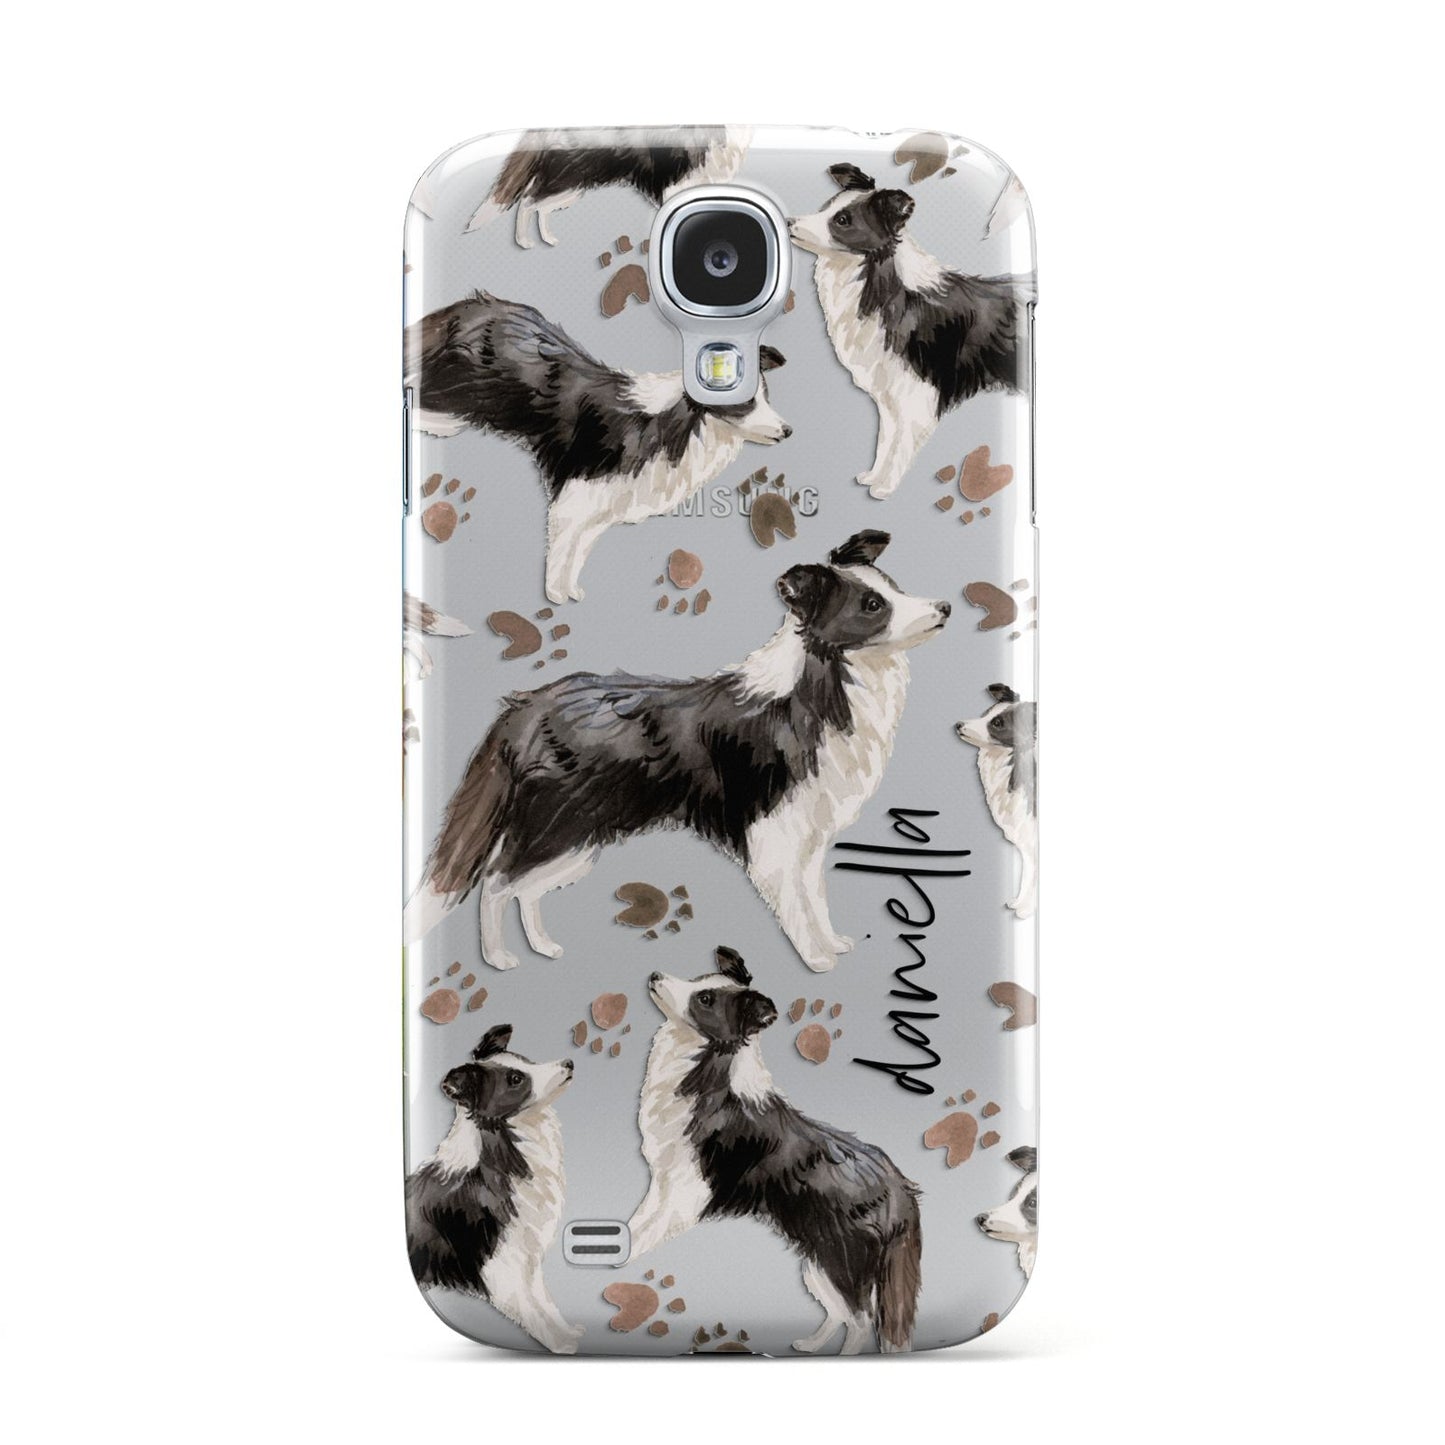 Personalised Border Collie Dog Samsung Galaxy S4 Case